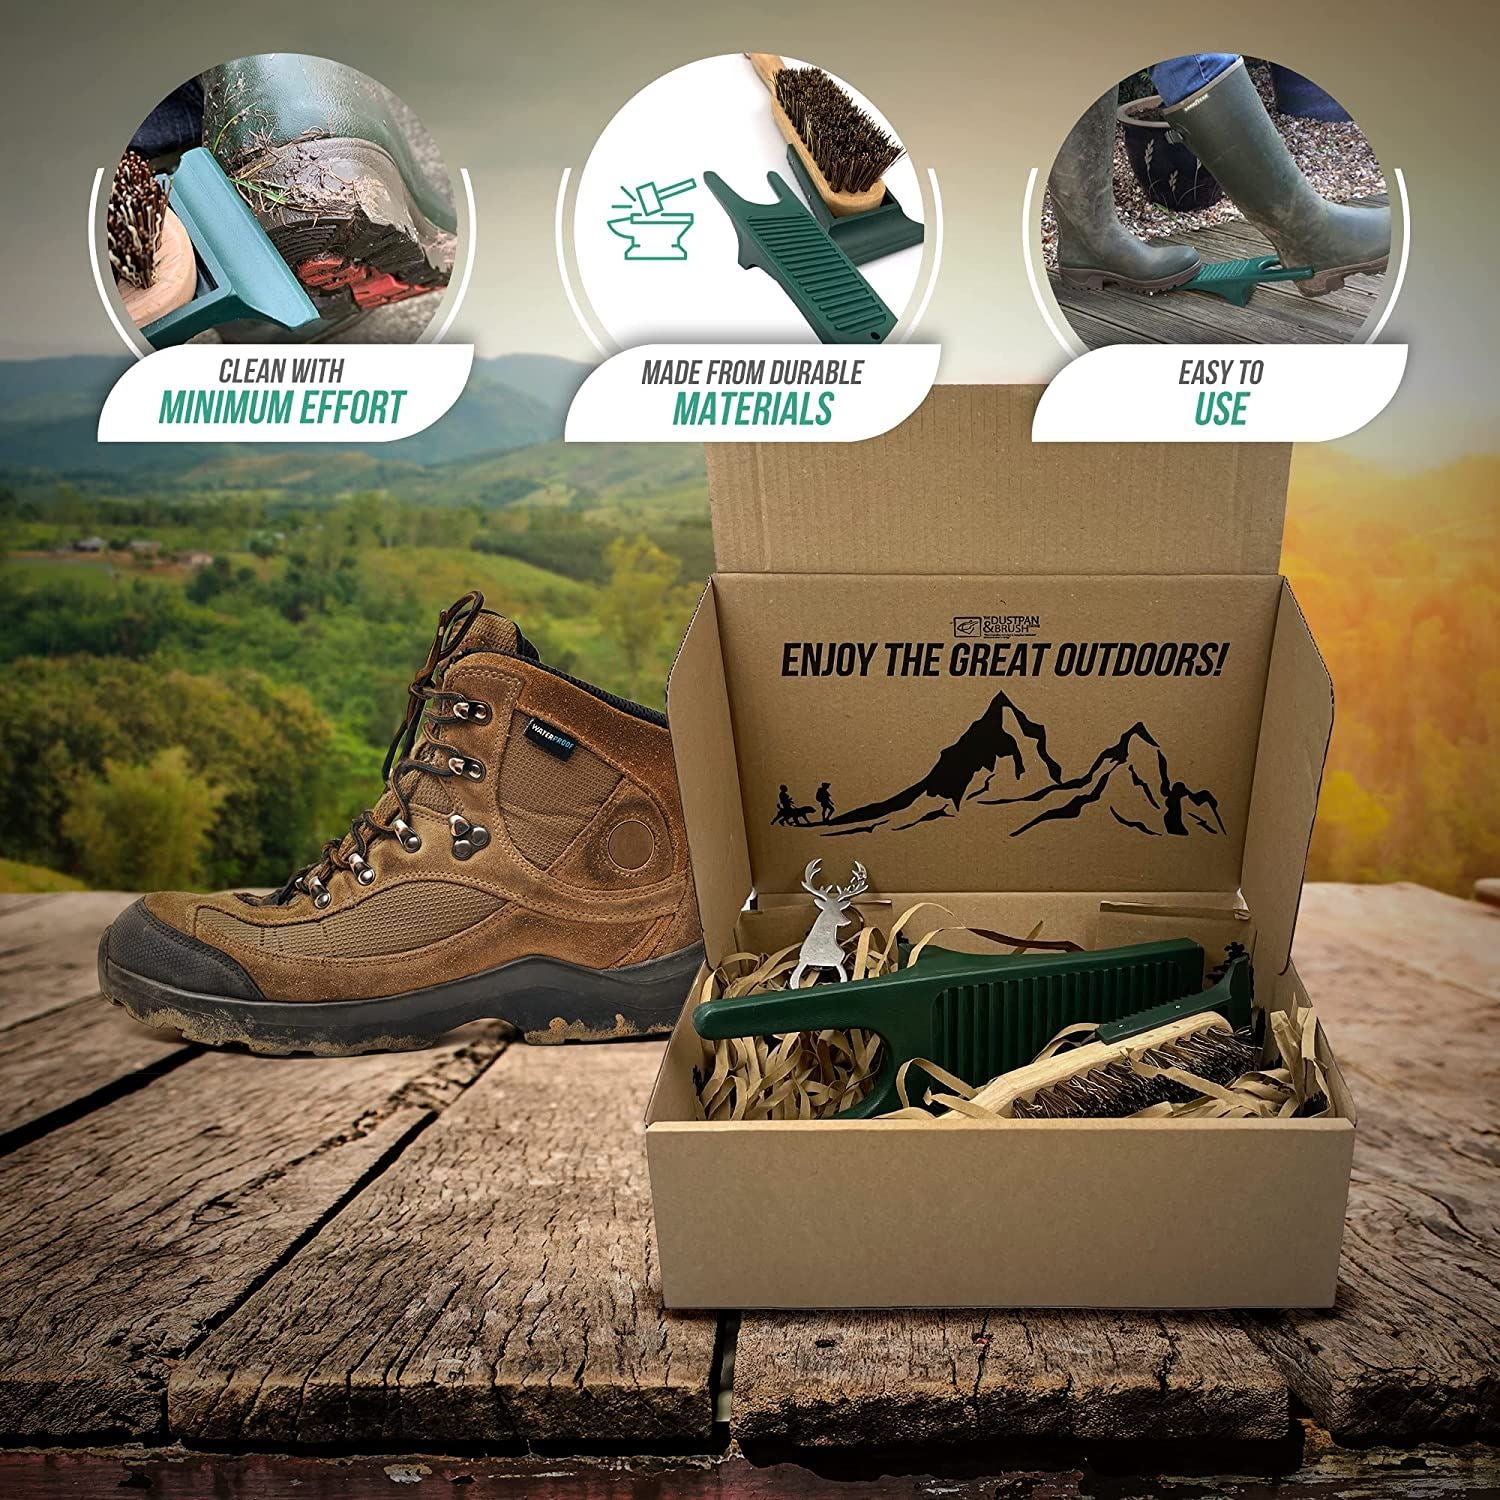 Walkers Gift Box Set - Boot